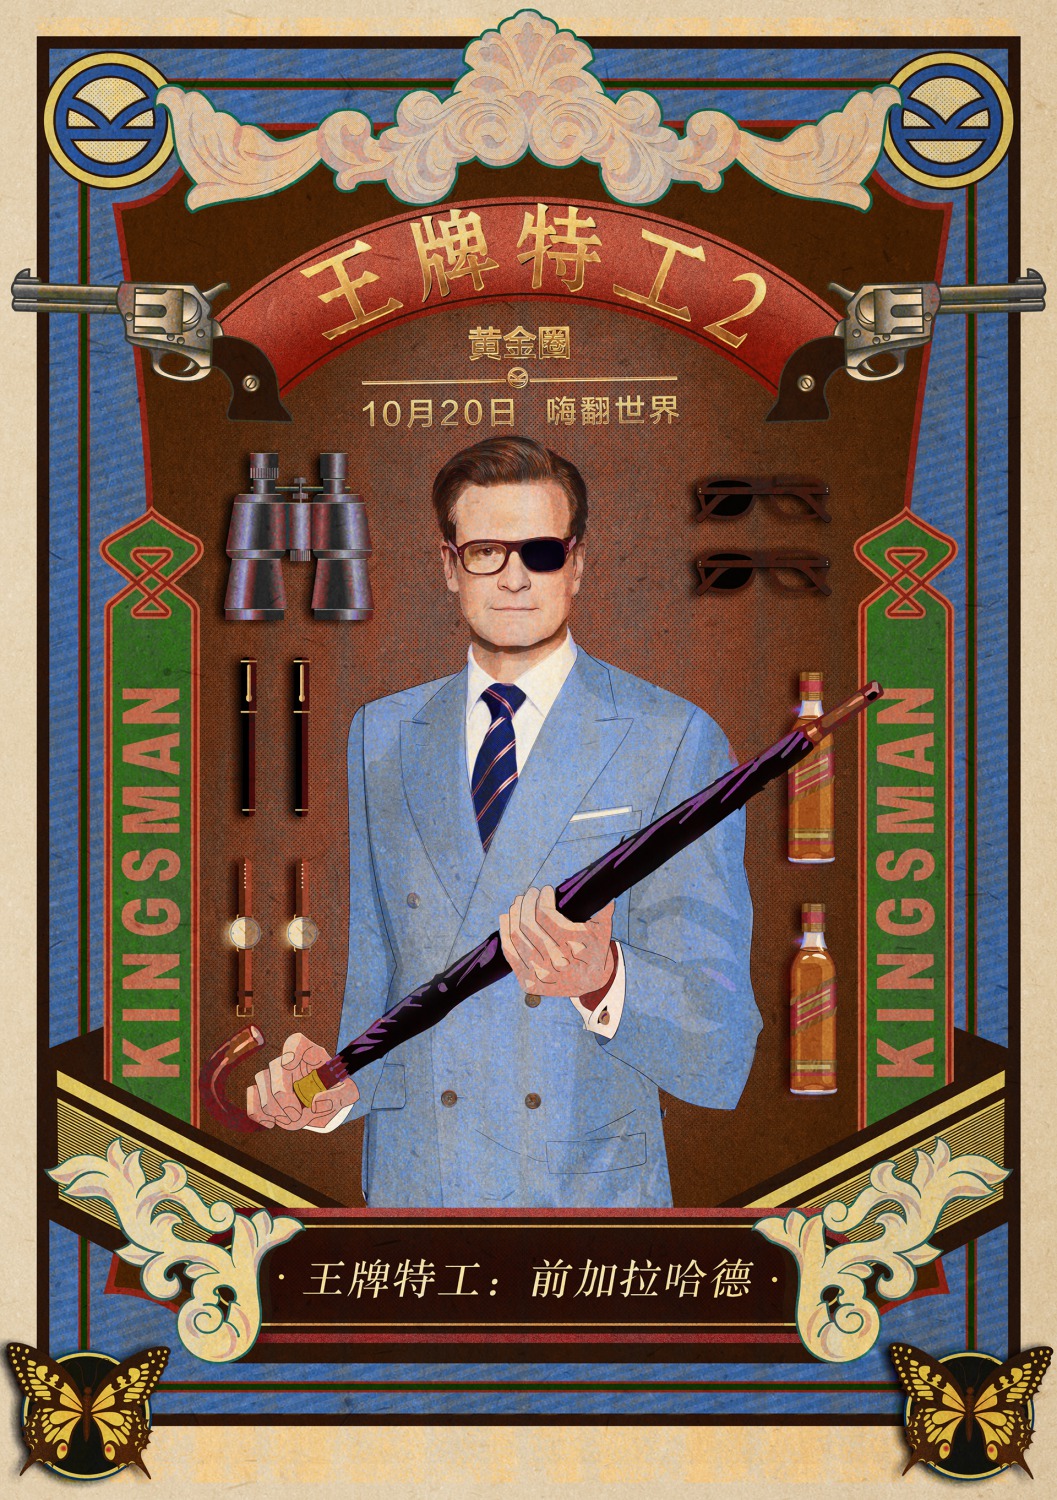 Extra Large Movie Poster Image for Kingsman: The Golden Circle (#34 of 41)